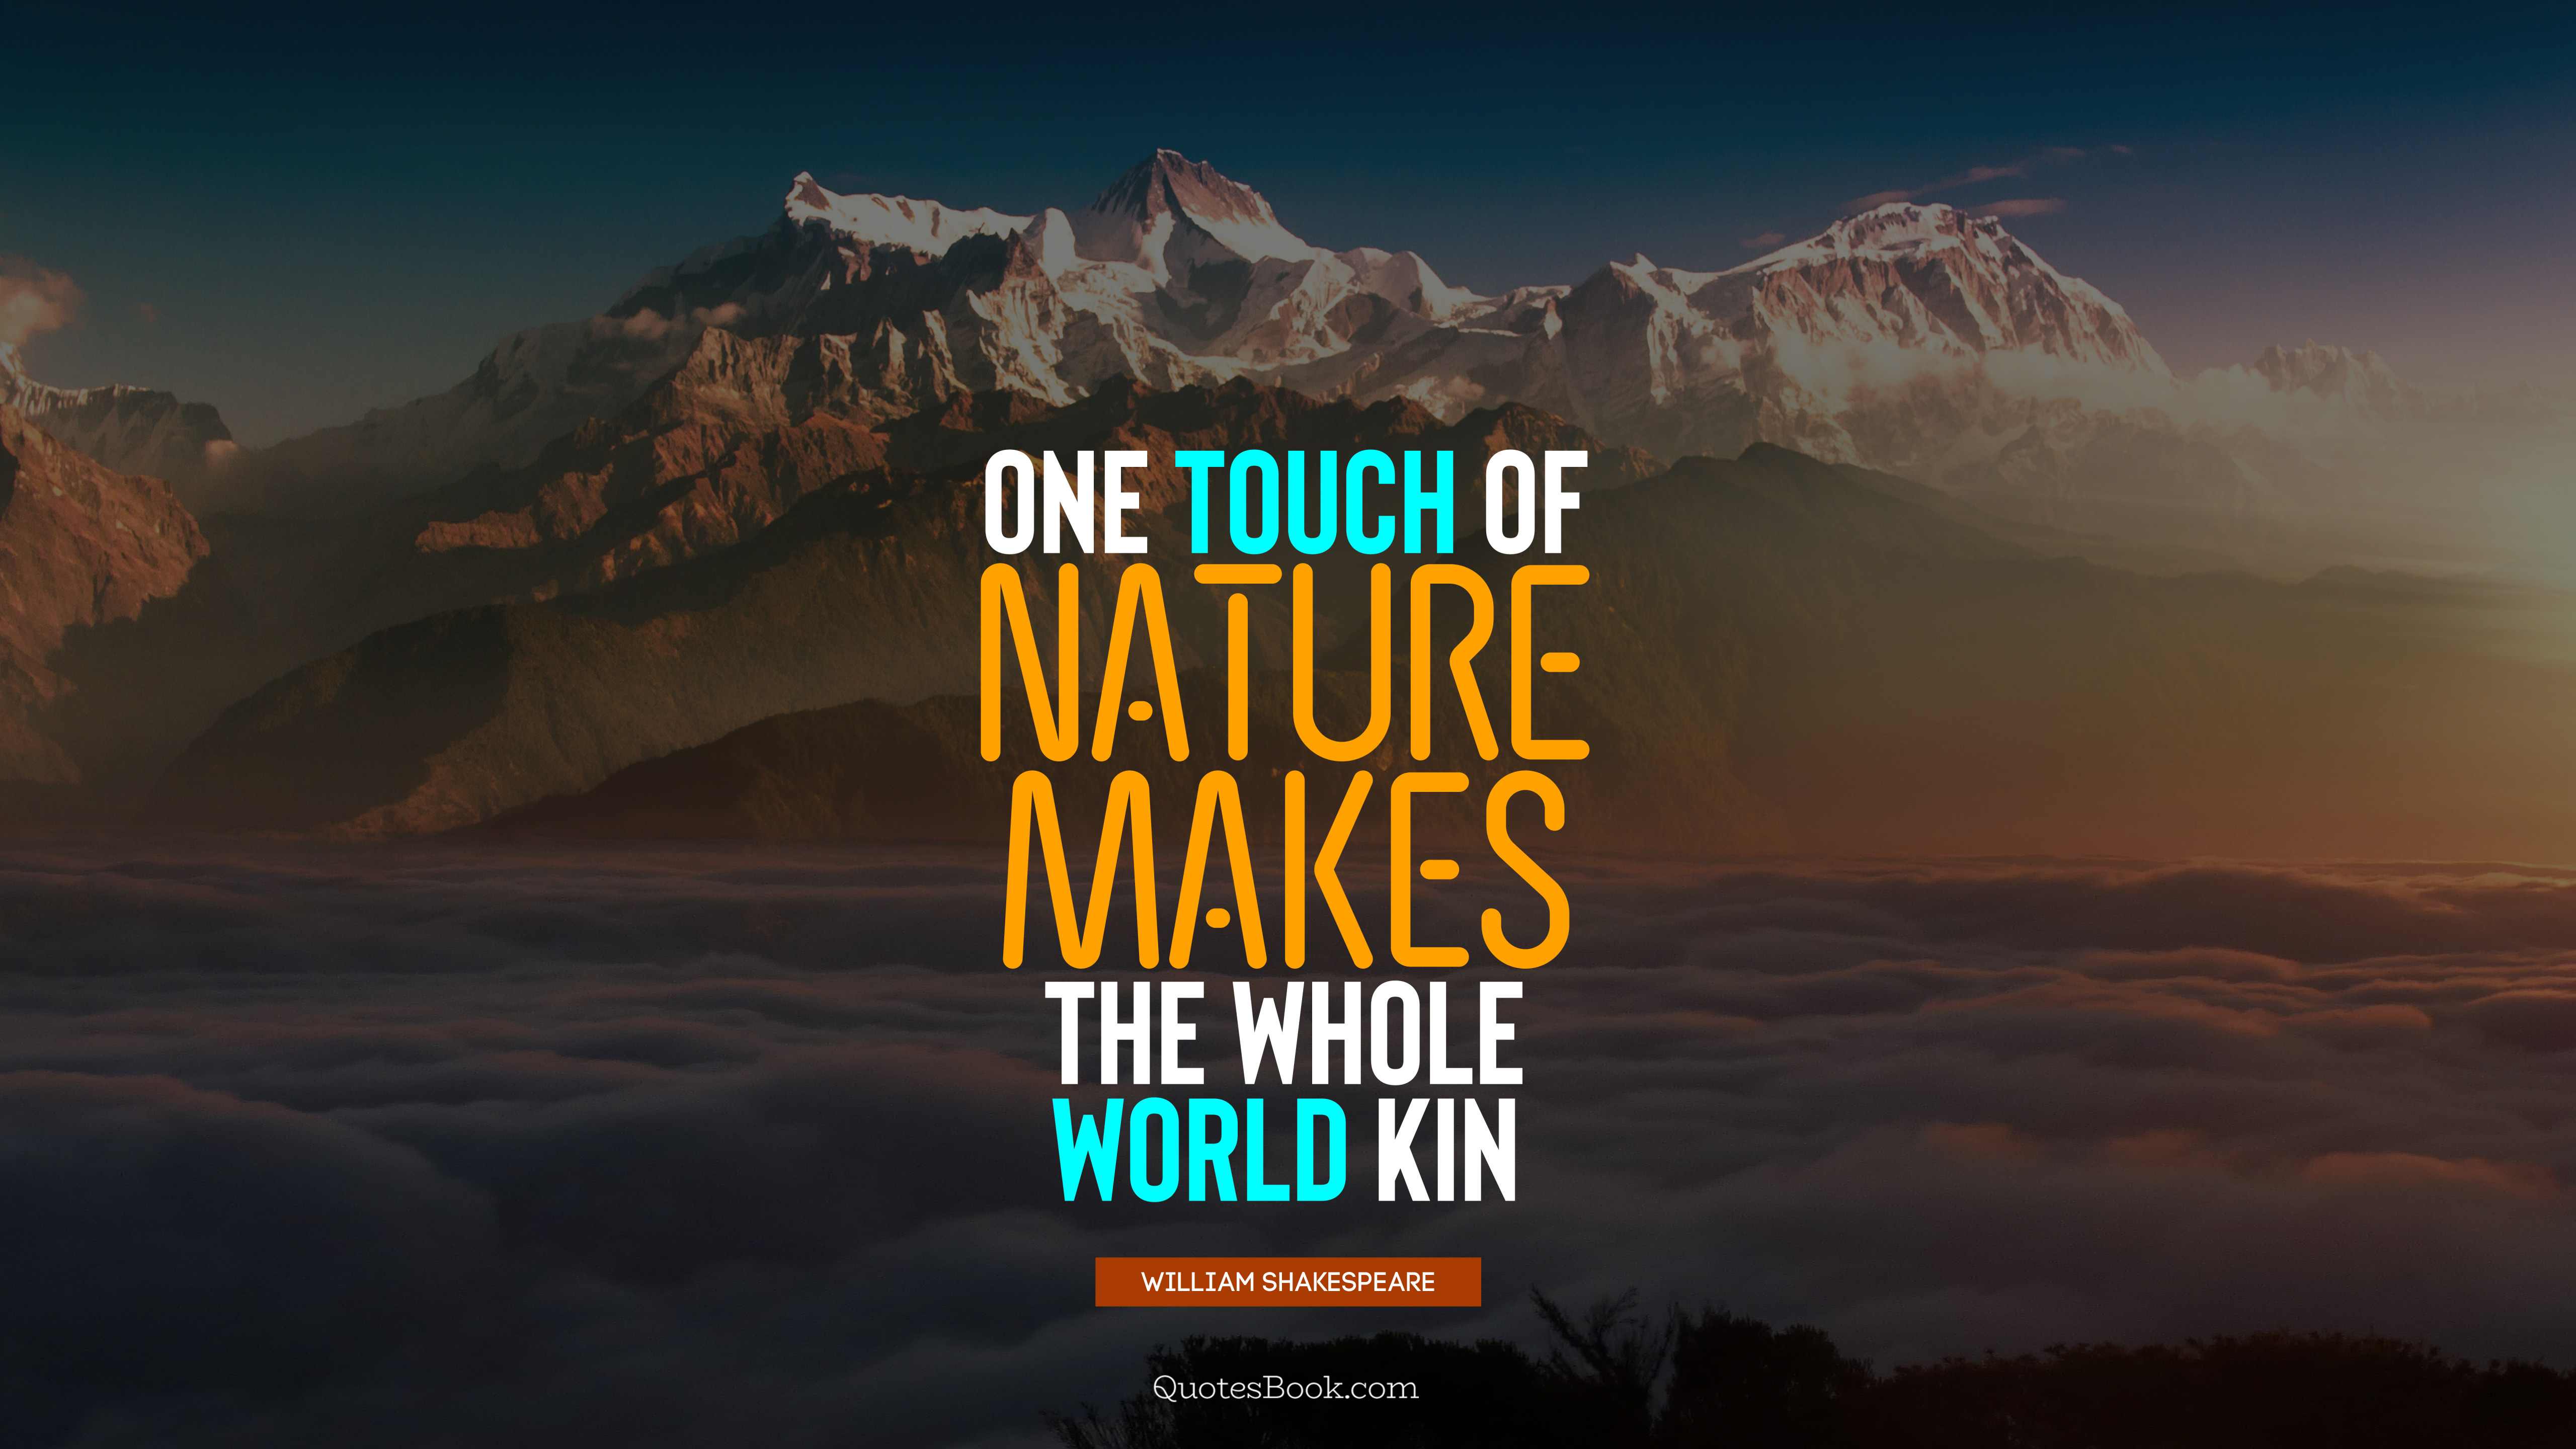 One touch of nature makes the whole world kin. - Quote by William